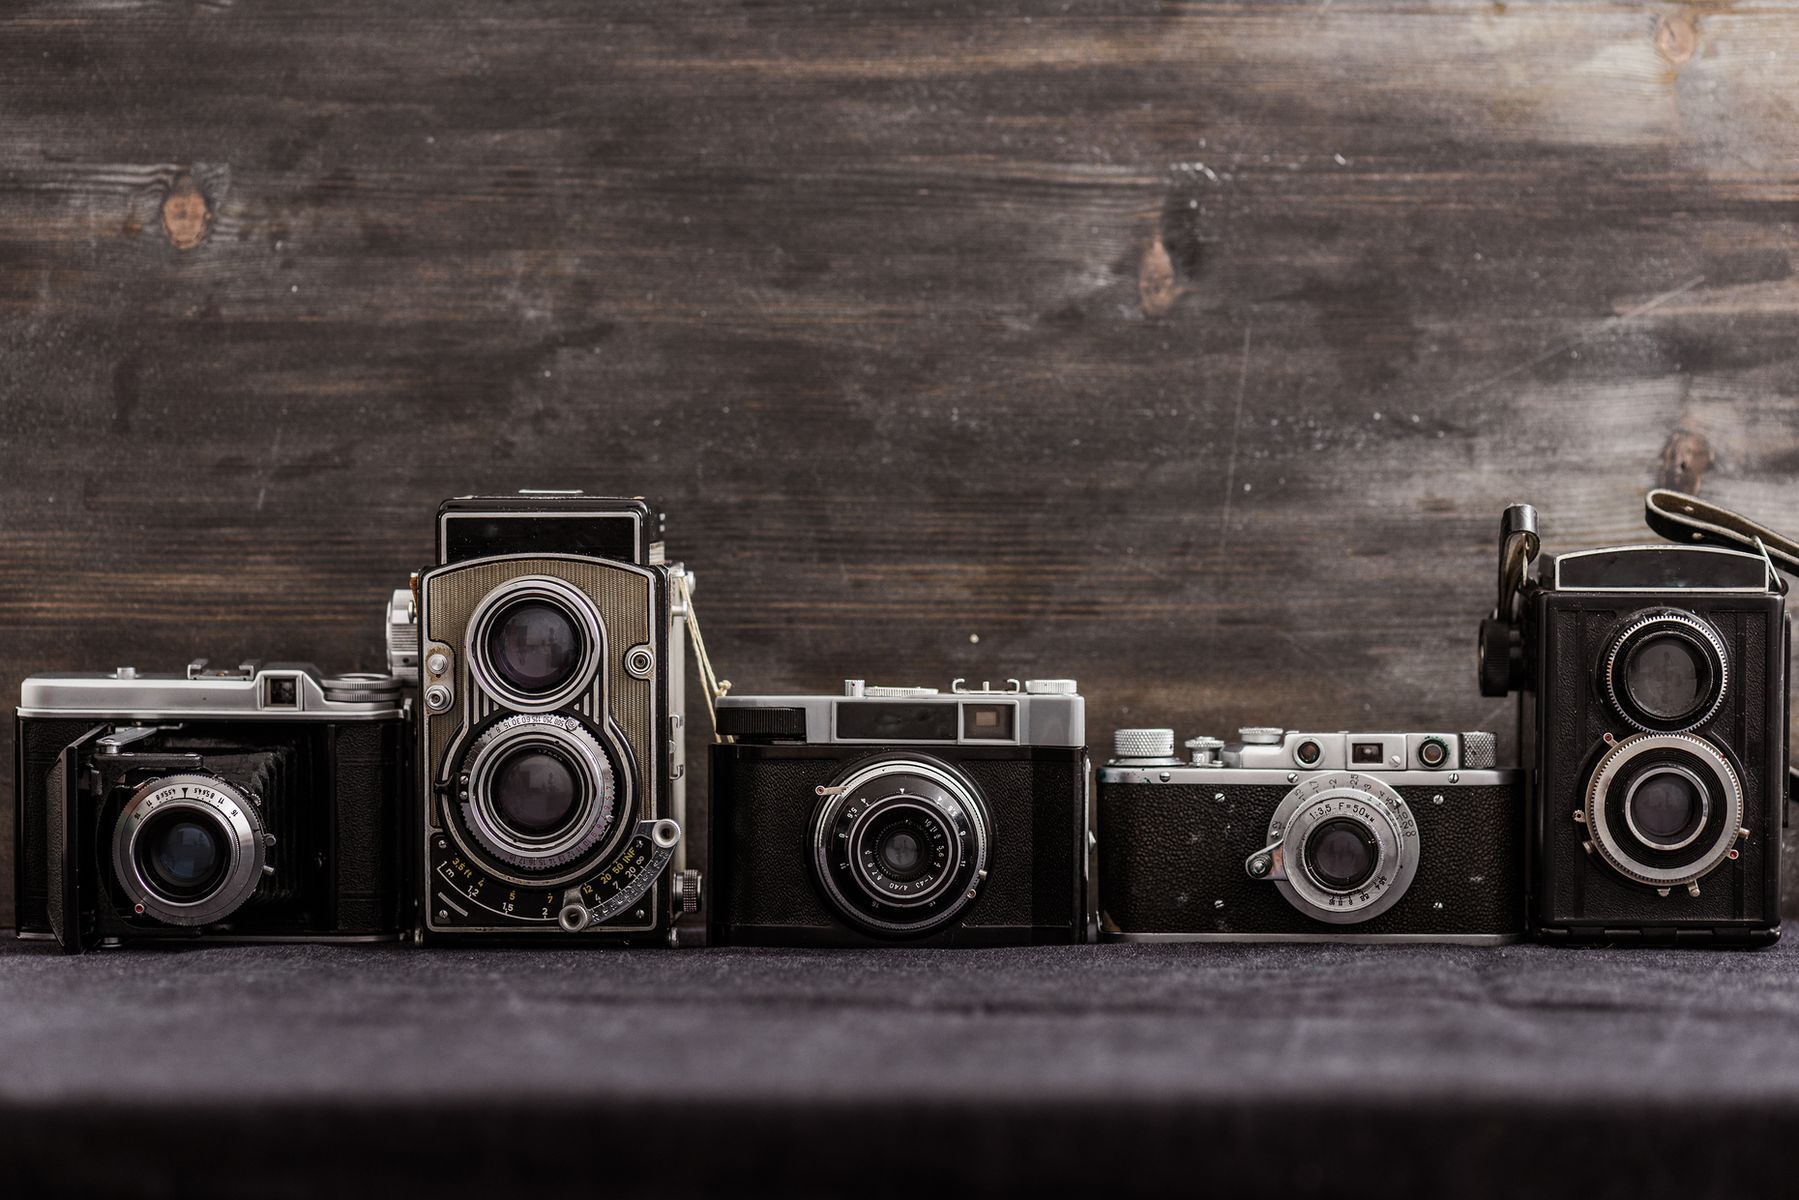 <p>Very few companies still produce old-fashioned film cameras, but there is still a market for old cameras from enthusiasts, collectors and budding photographers. If you have a vintage camera lying around your house in good condition, the website <a href="https://collectiblend.com/Cameras/" title="https://collectiblend.com/Cameras/">CollectiBlend</a> can help you determine a reasonable price.</p>